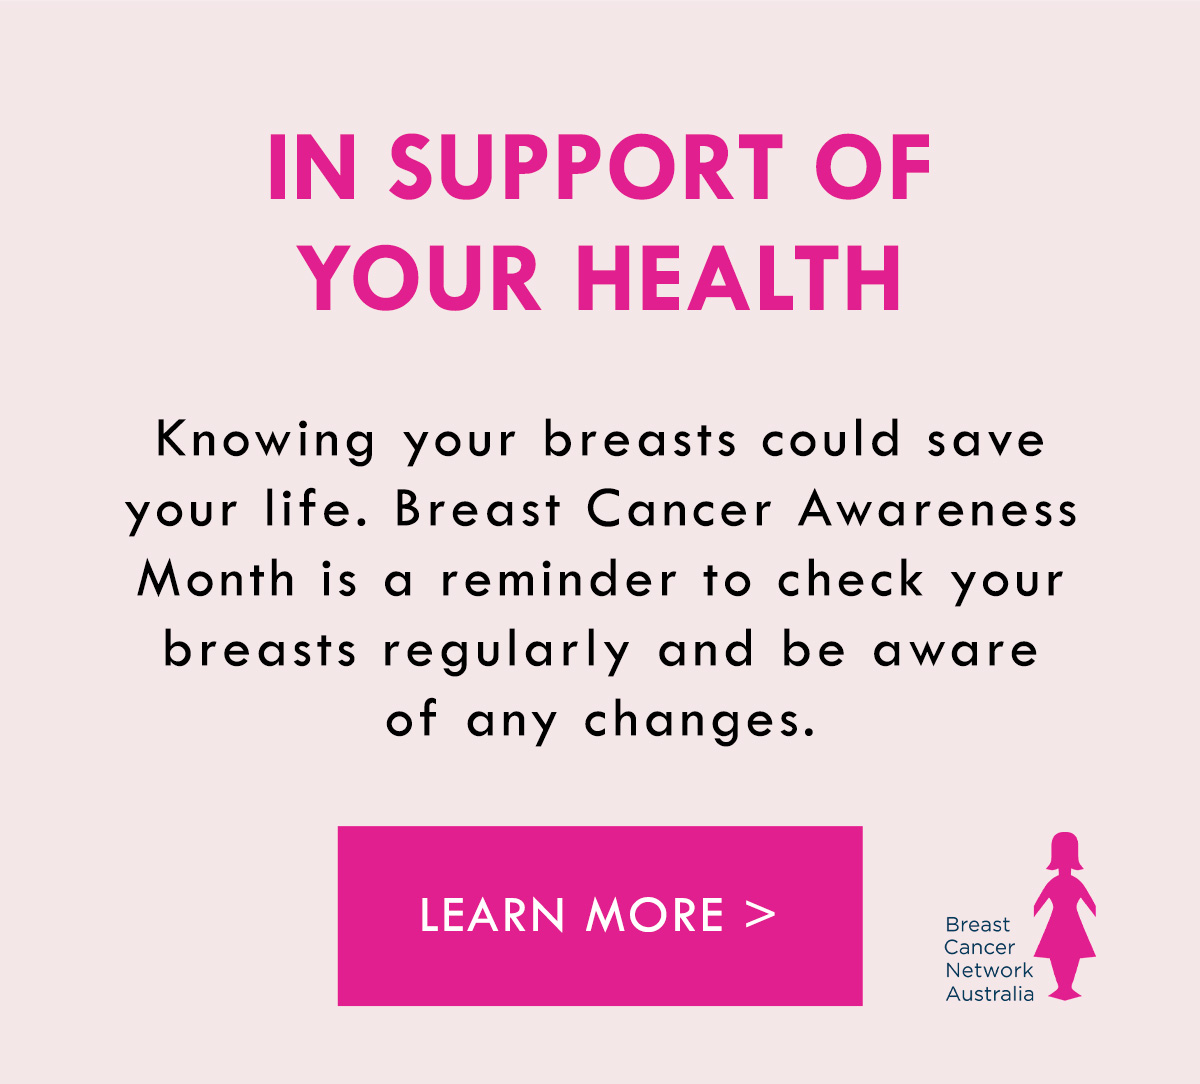 In Support Of Your Health. Breast Cancer Awareness Month is a reminder to check your breasts regularly and be aware of any changes. Learn more.